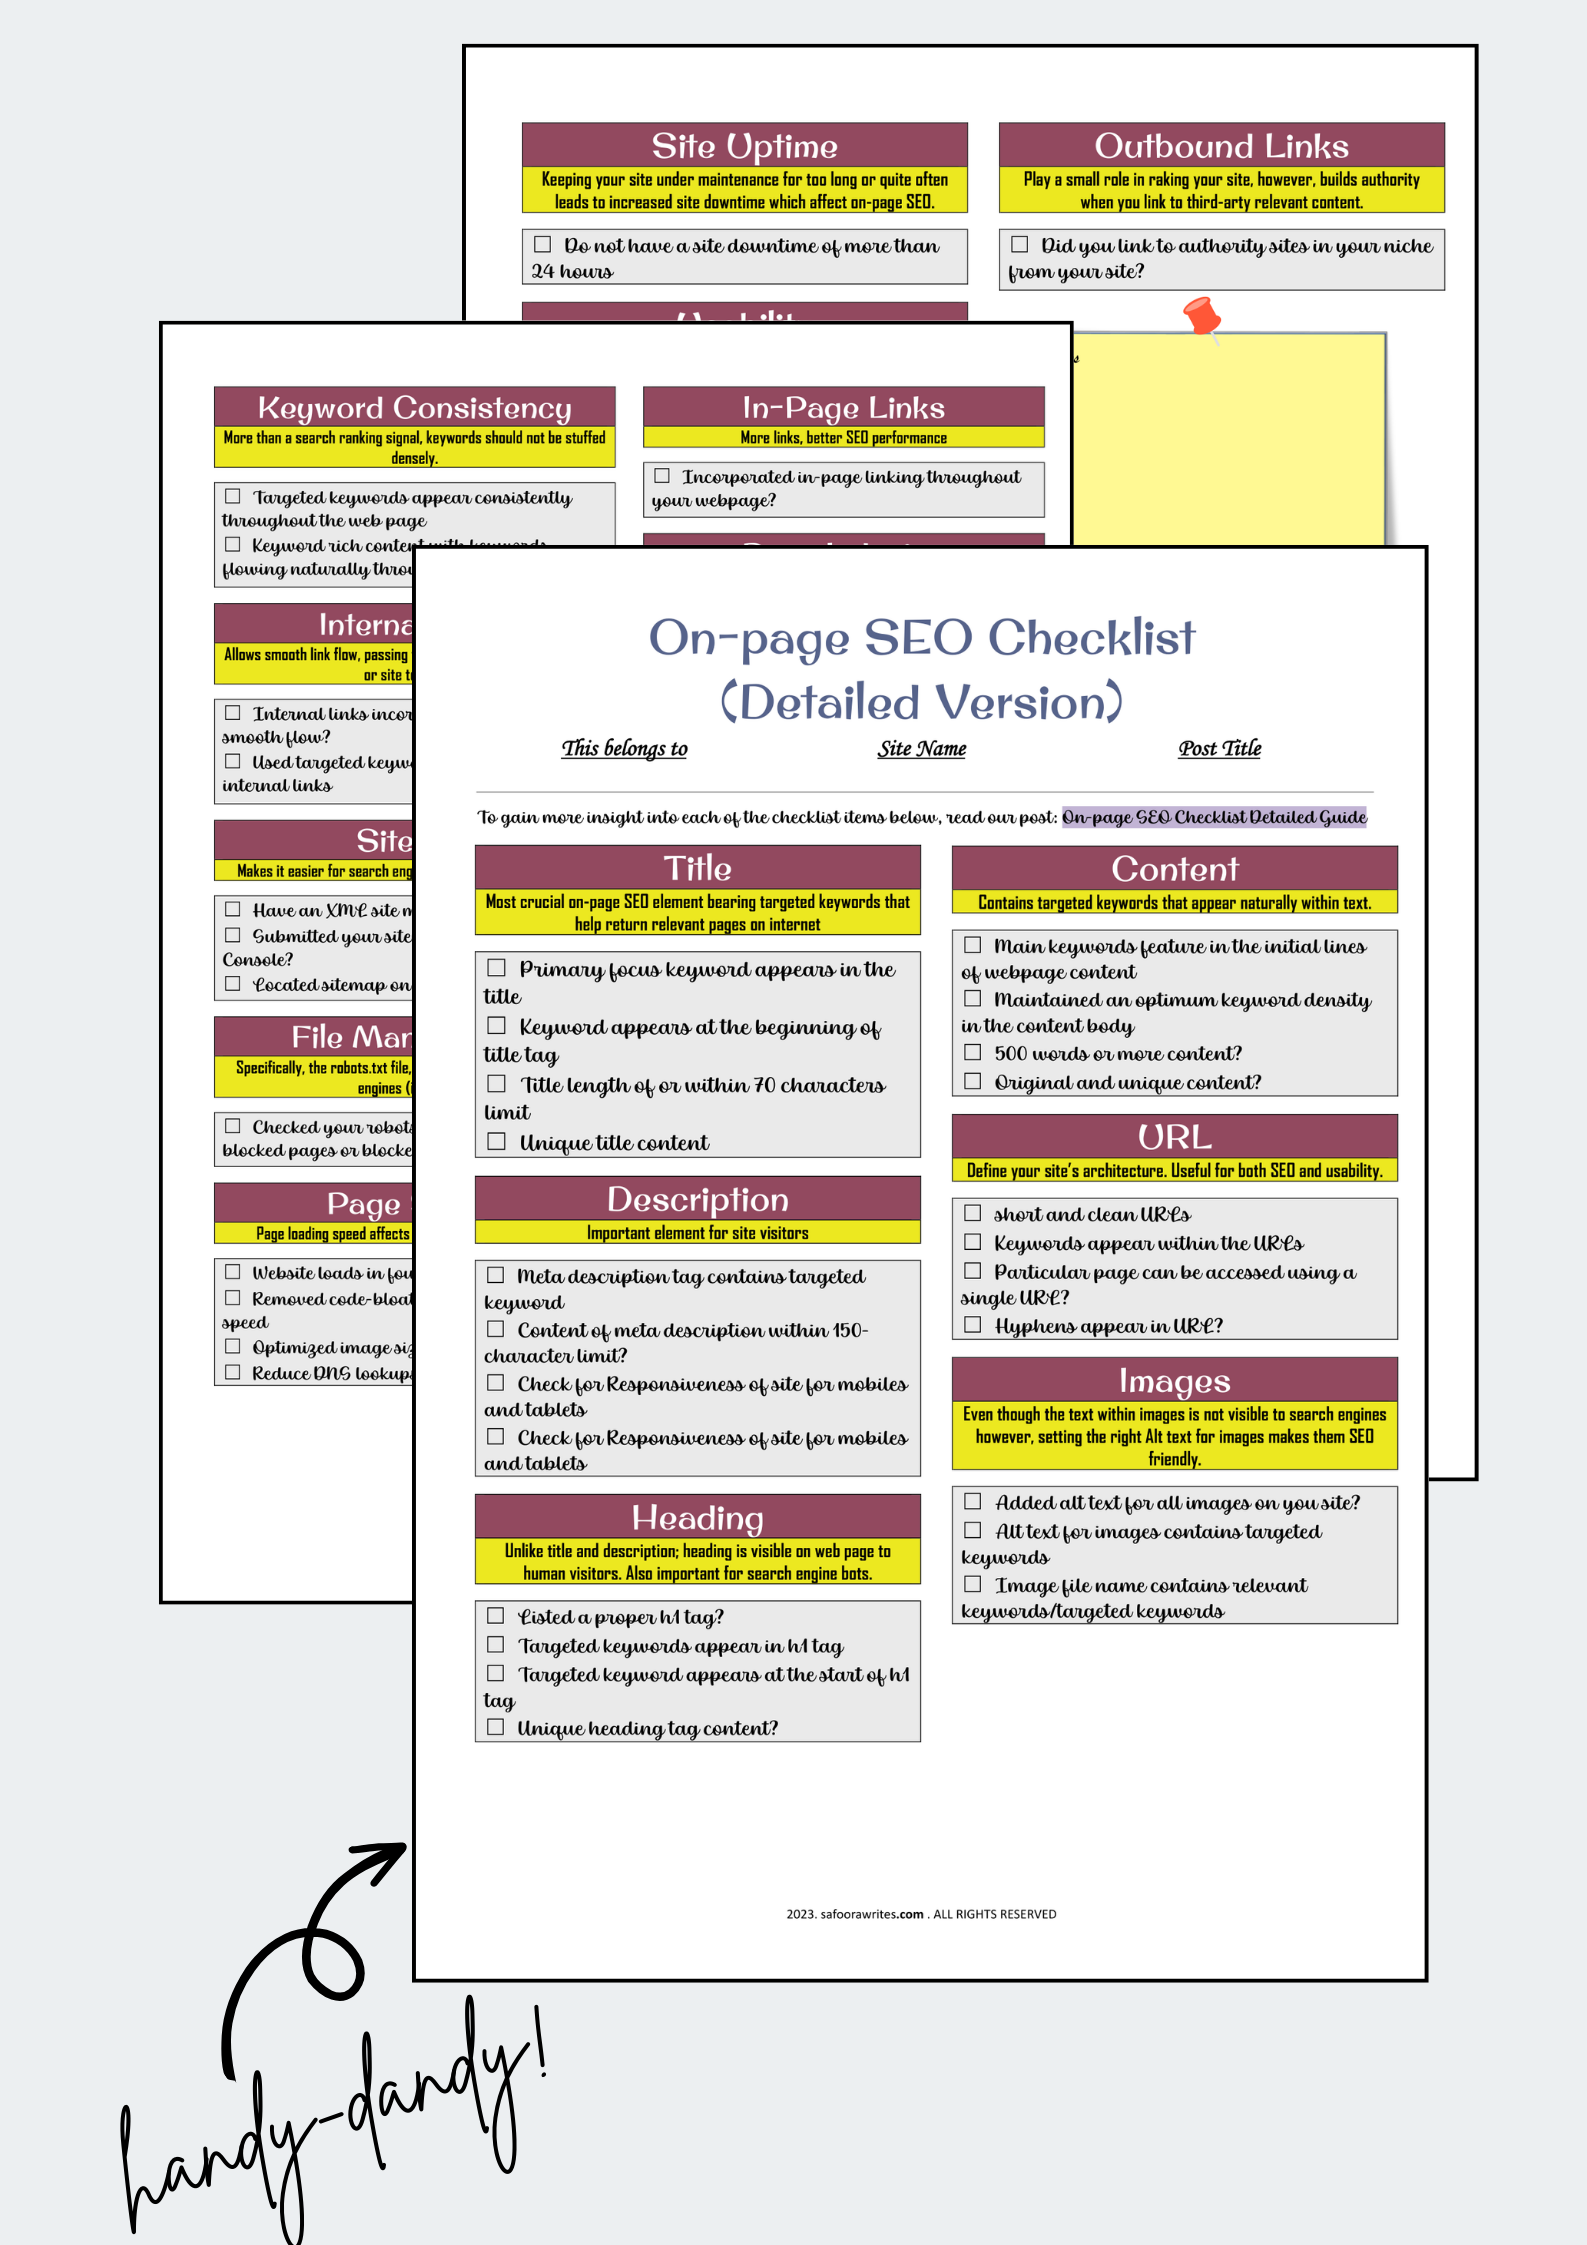 Detailed_OnPage_SEO_Checklist_Image